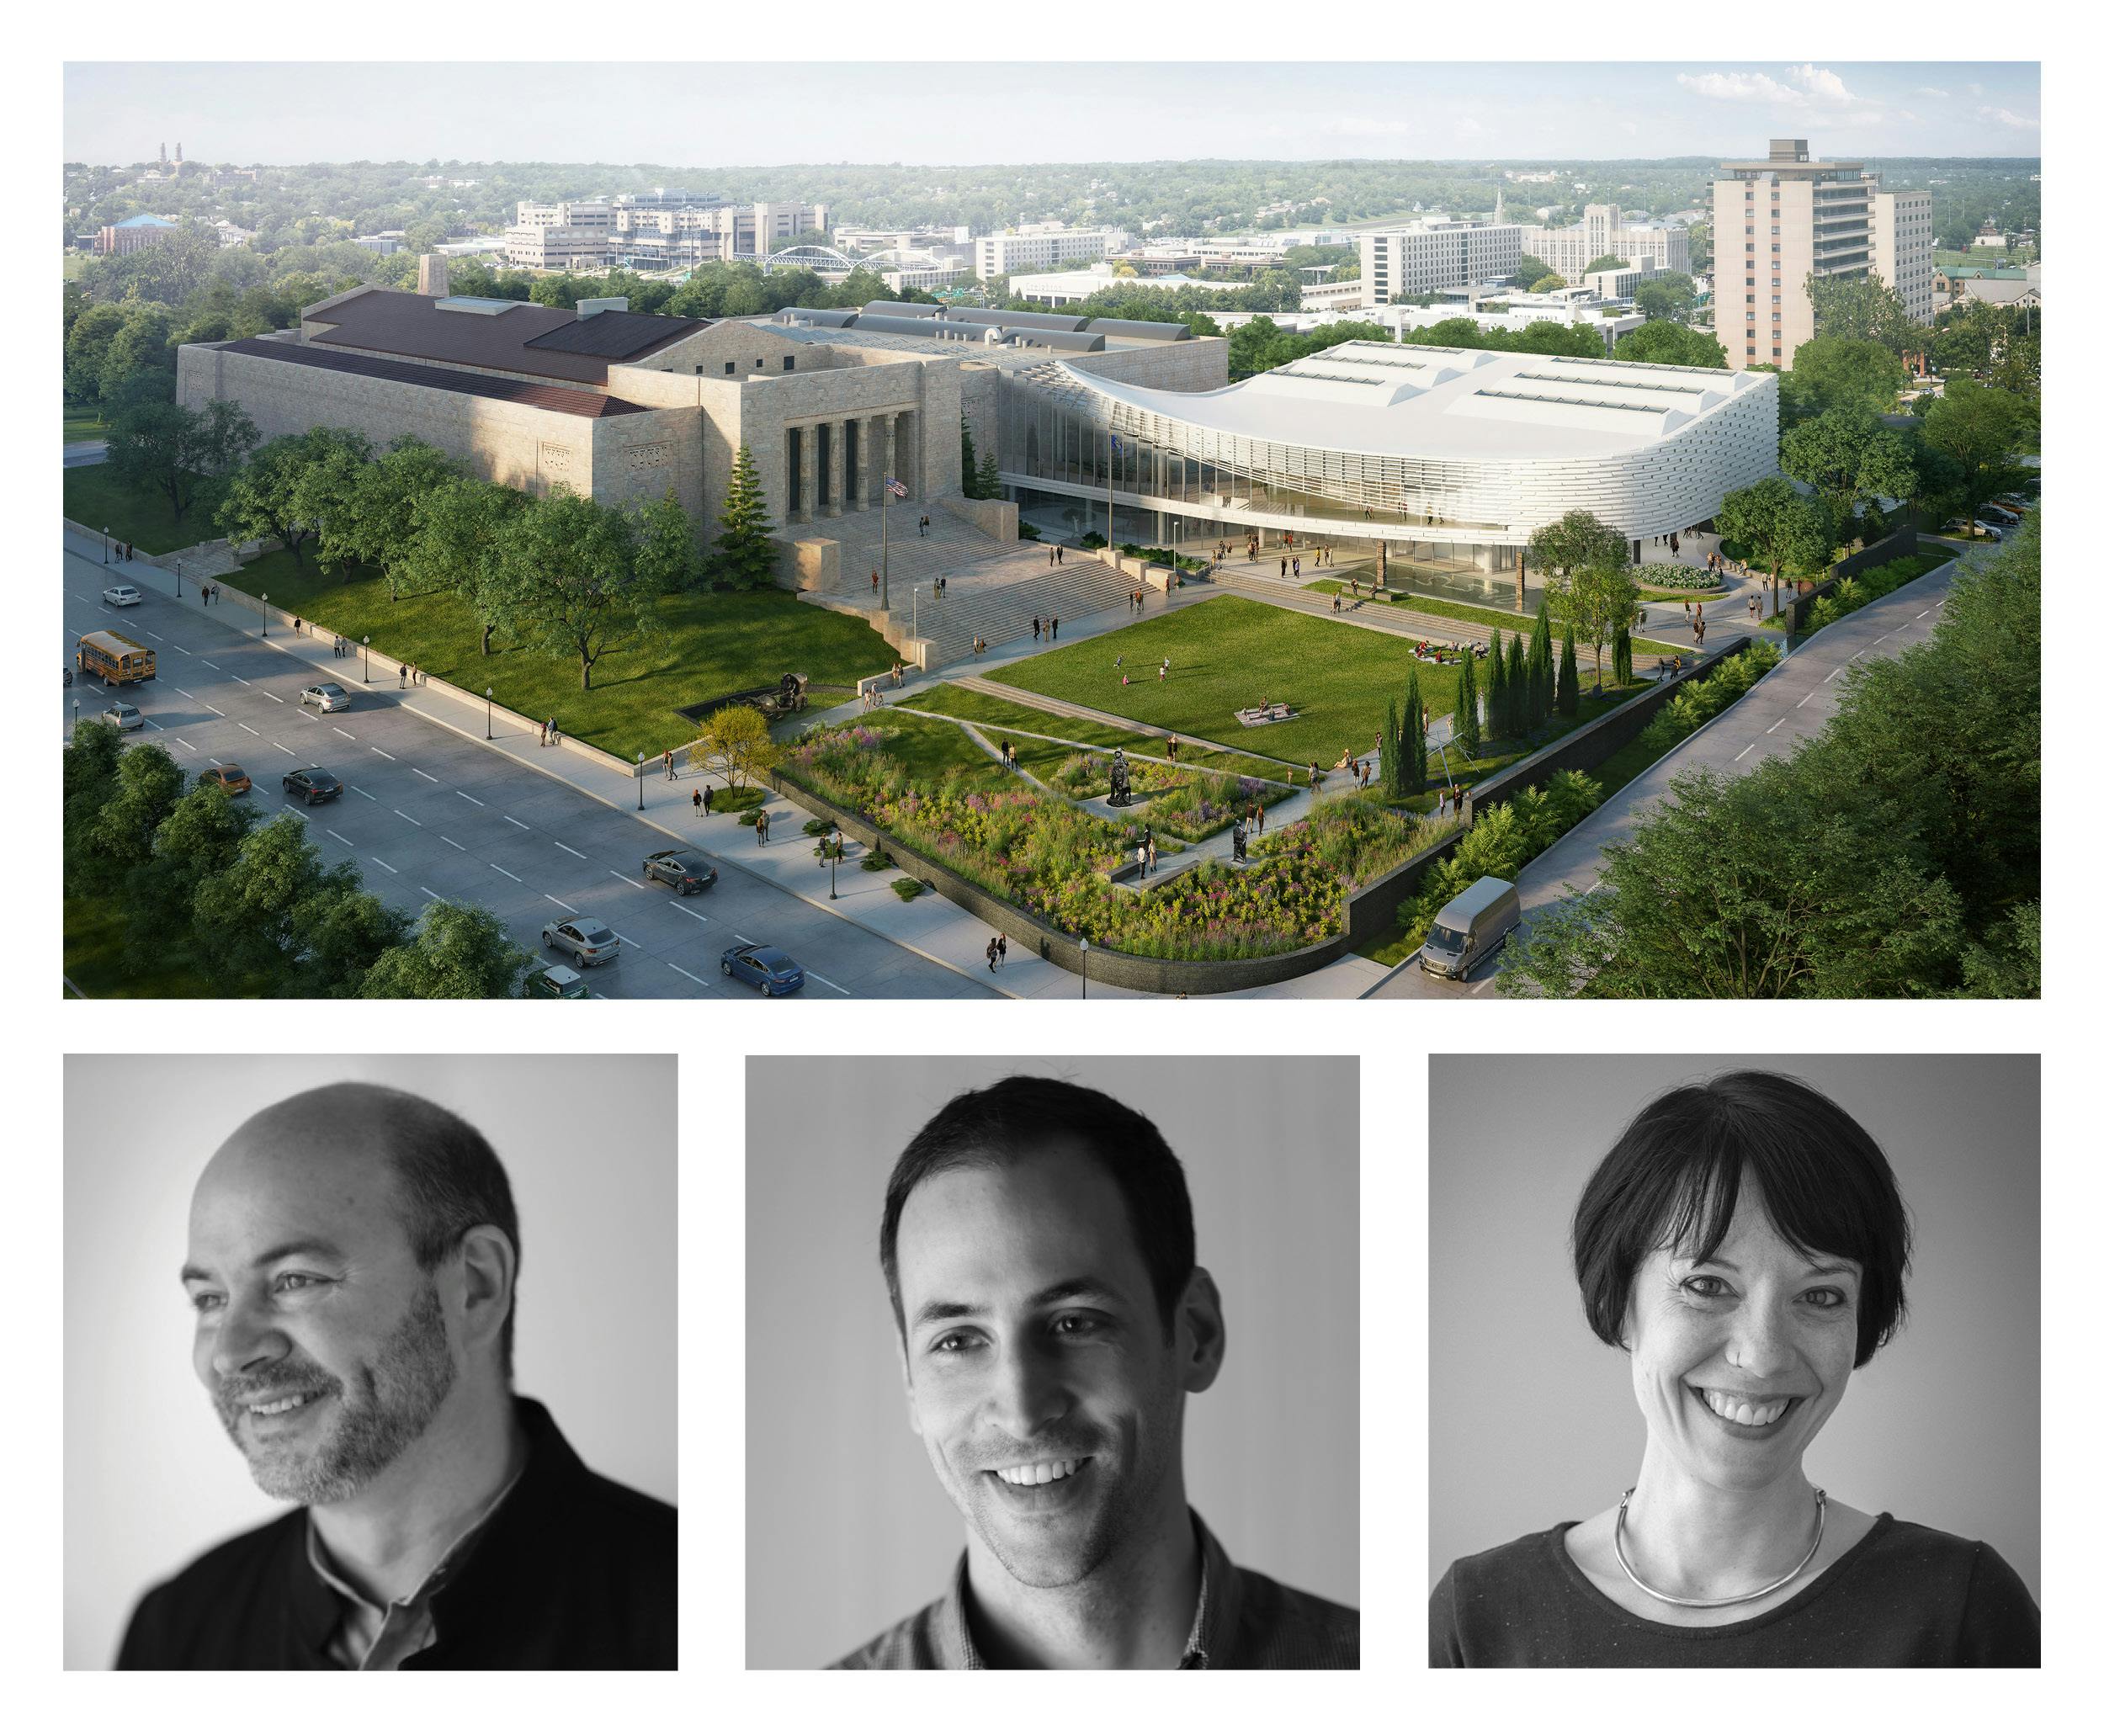 An aerial view of a modern, expansive architectural complex surrounded by greenery occupies the top portion of the image. The bottom portion shows three black-and-white headshot photos of a smiling man with a beard, another smiling man, and a smiling woman.